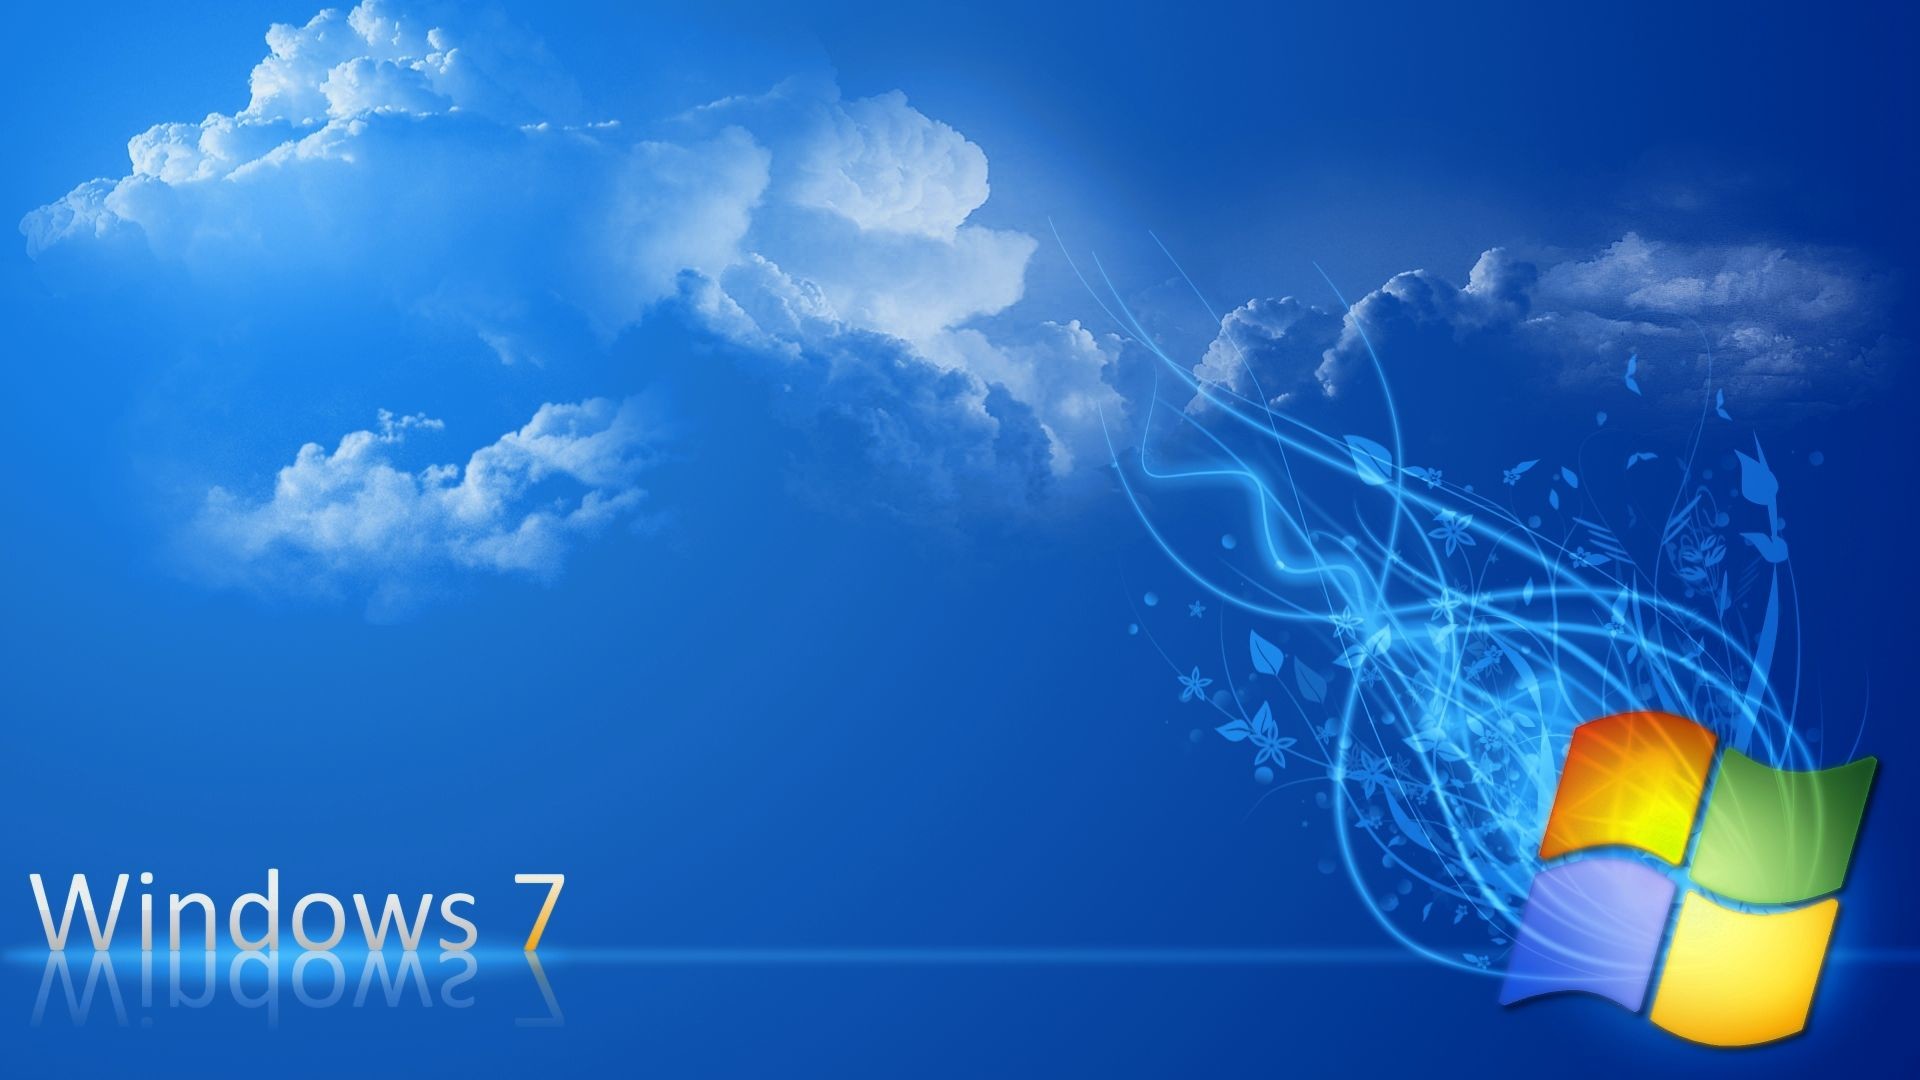 1920x1080 Hd Wallpapers For Windows 7 – 1920?1080 High Definition Wallpaper .